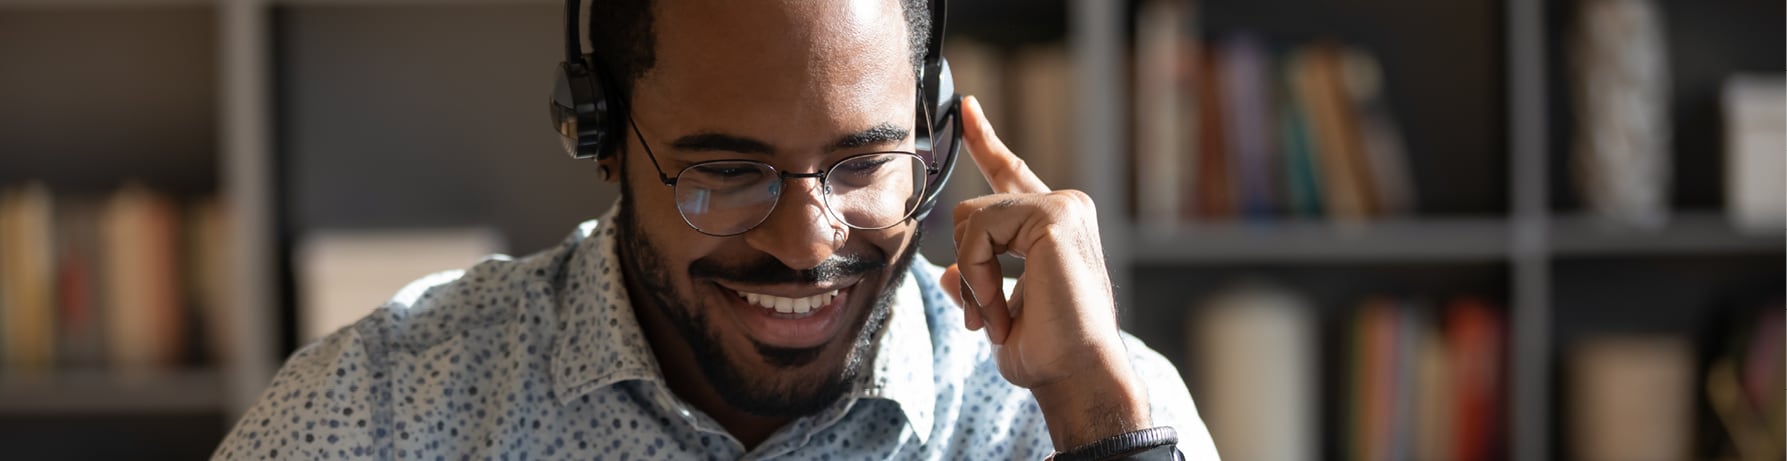 Smiling man wearing headphones and talking into the speaker.